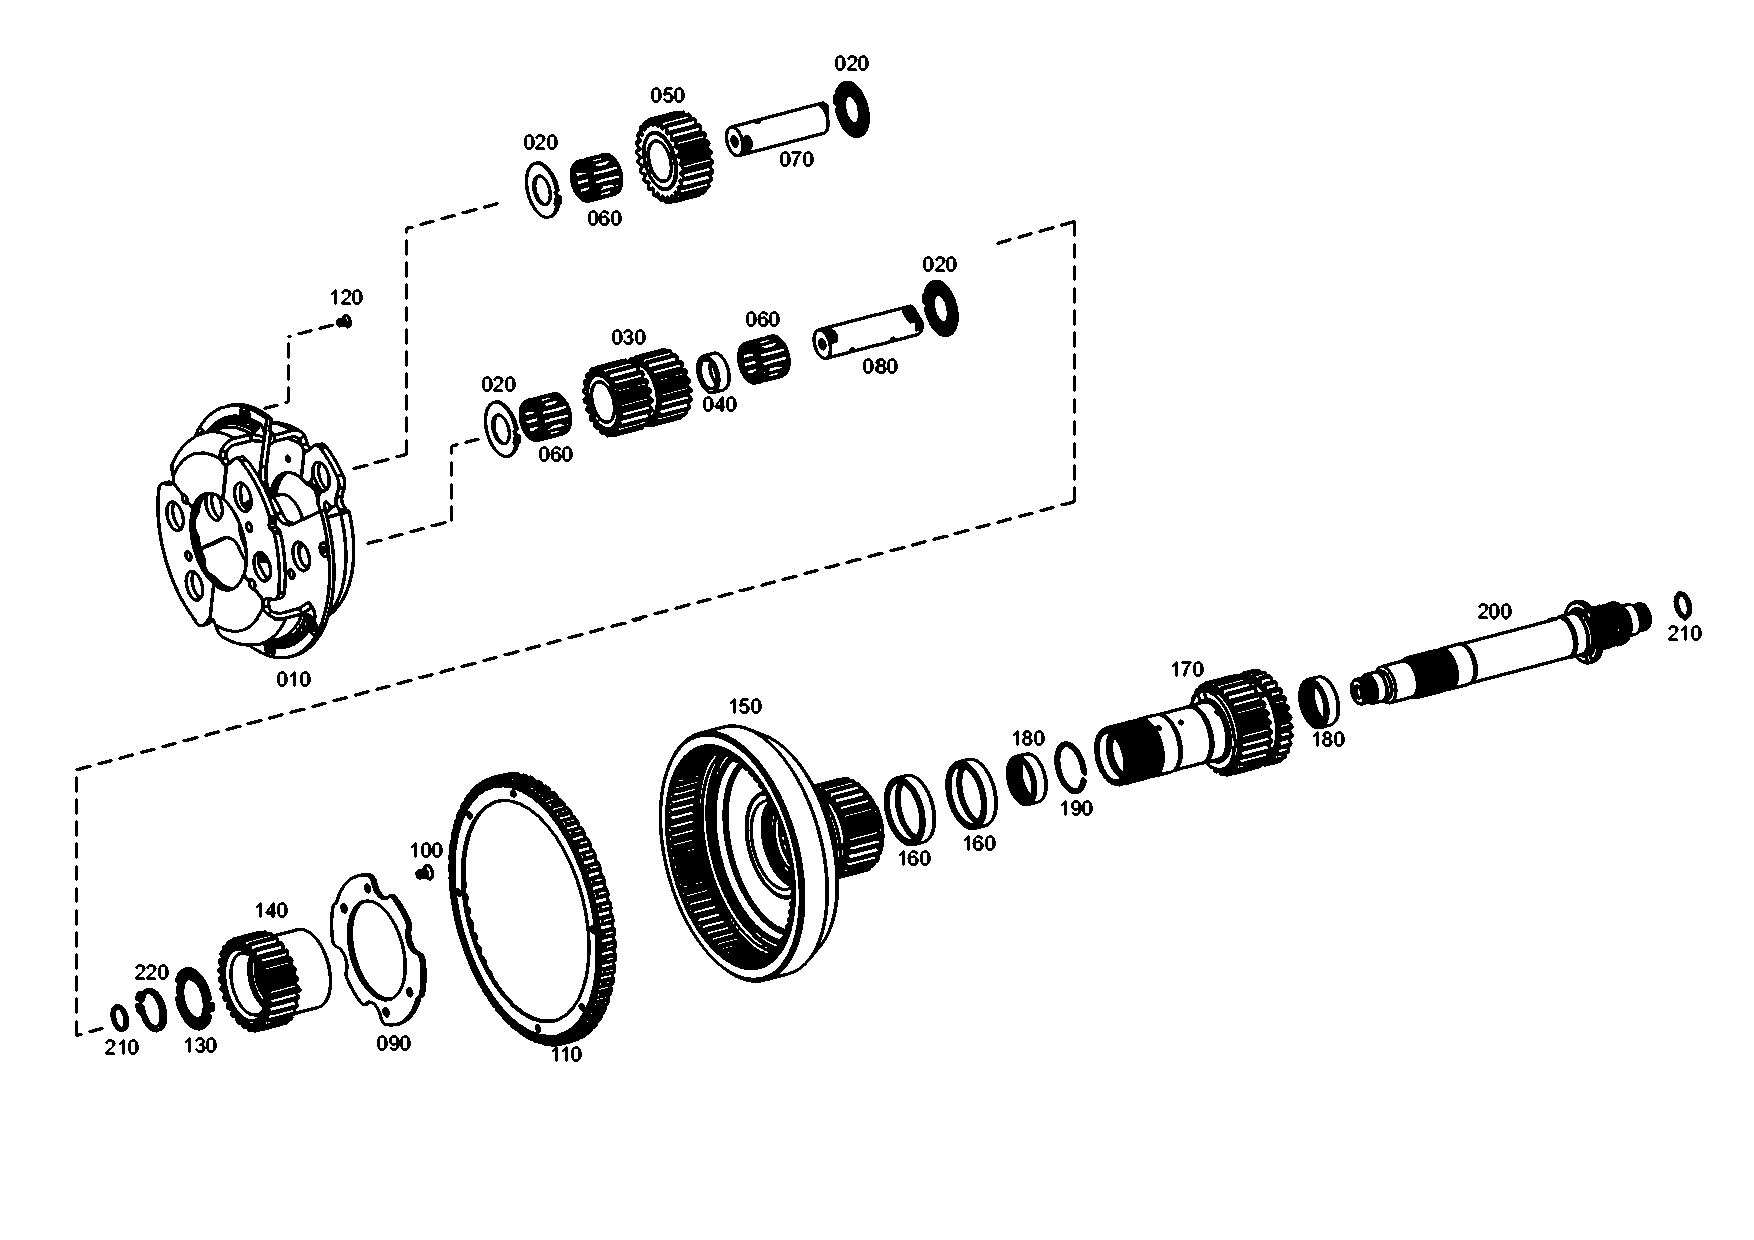 drawing for E. N. M. T. P. / CPG 192300220052 - PRESSURE DISK (figure 2)